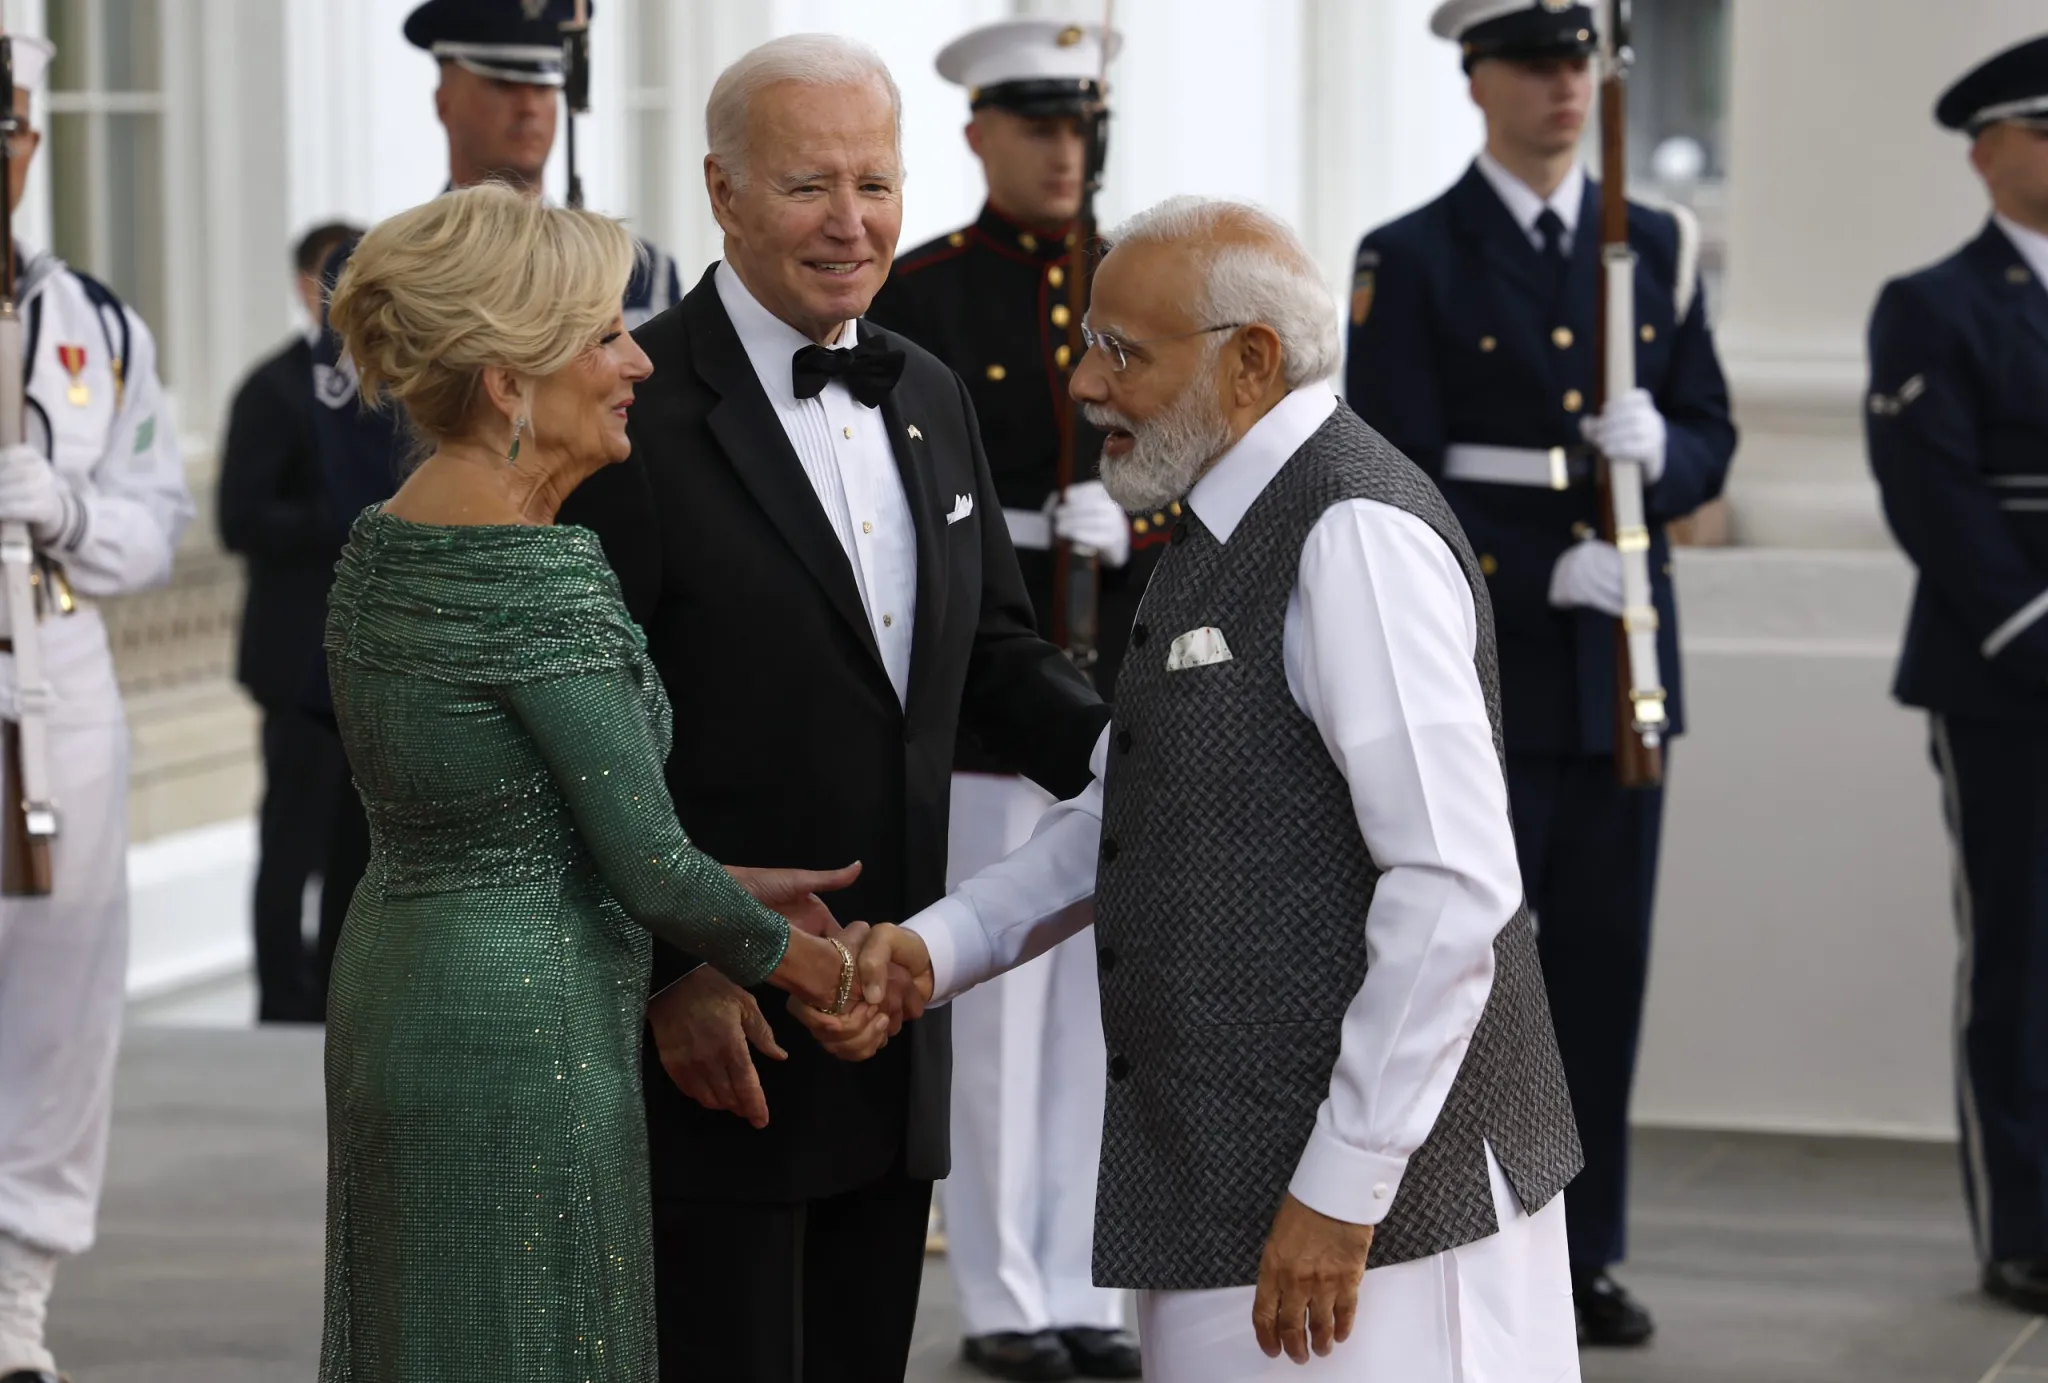 US President Joe Biden and first lady Jill Biden welcome Indian Prime Minister Narendra Modi to the White House on June 22, 2023, in Washington, DC. Photo: Anna Moneymaker/Getty Images.